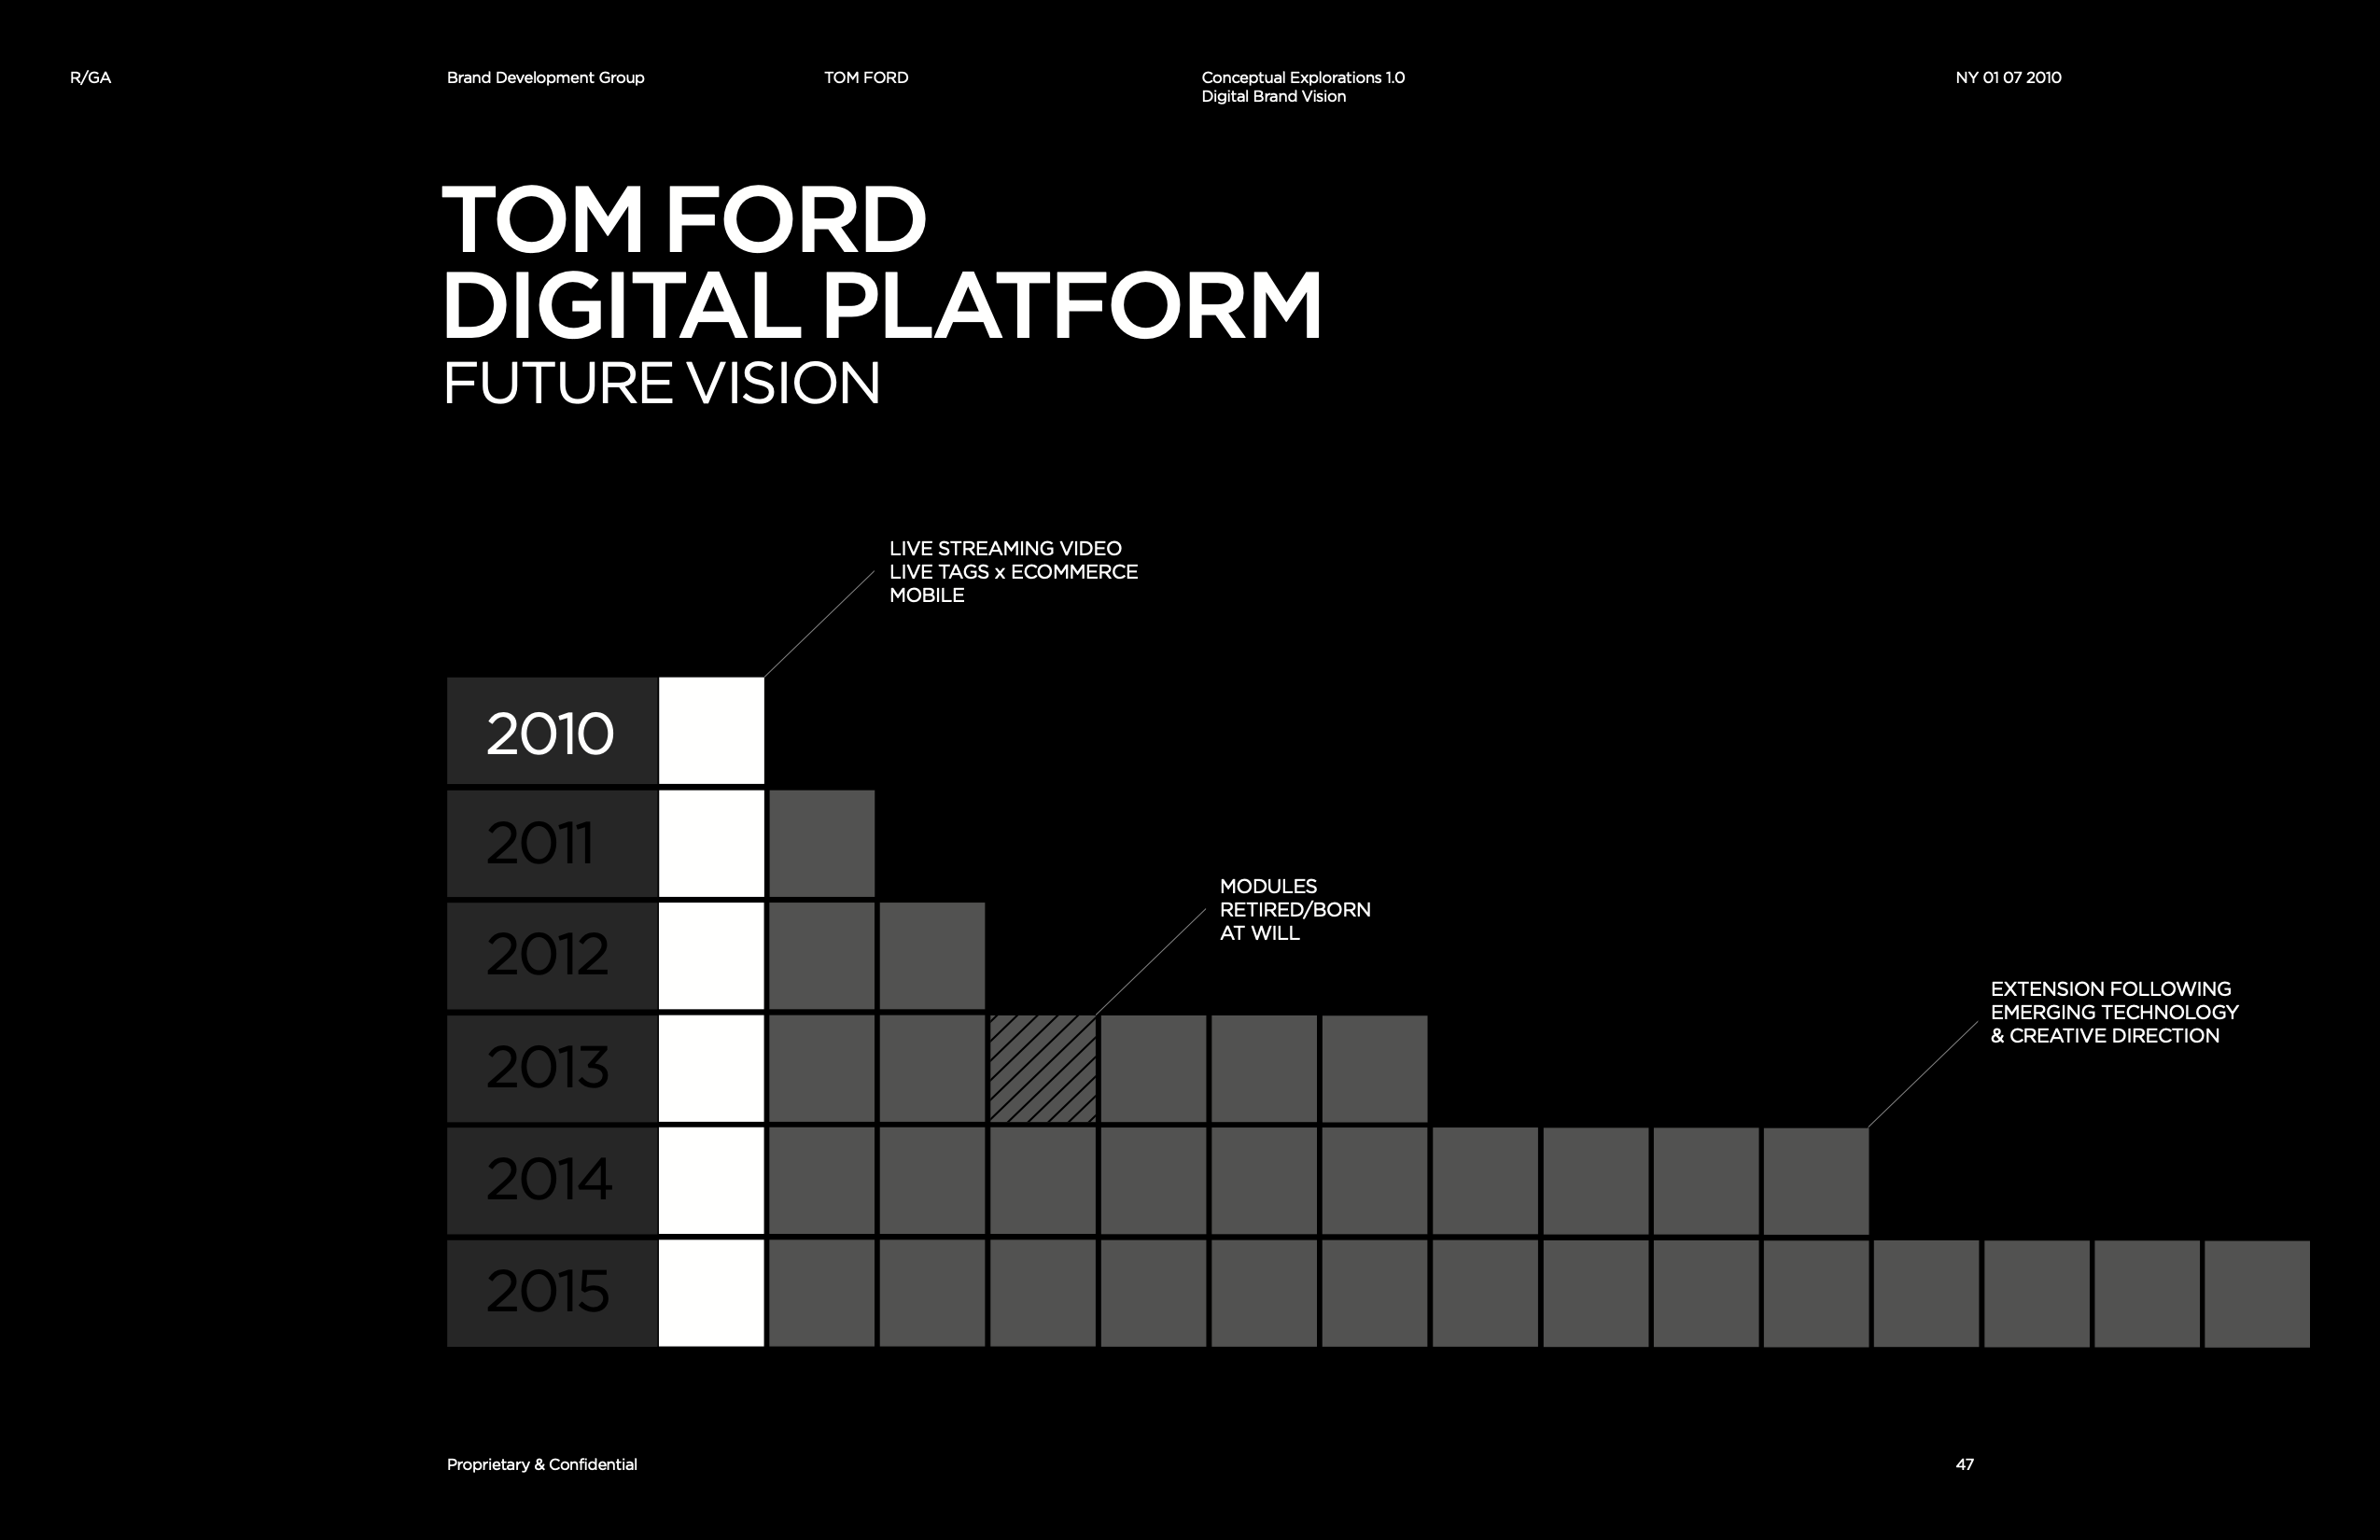 Tom Ford Brand Interface / Disclosure